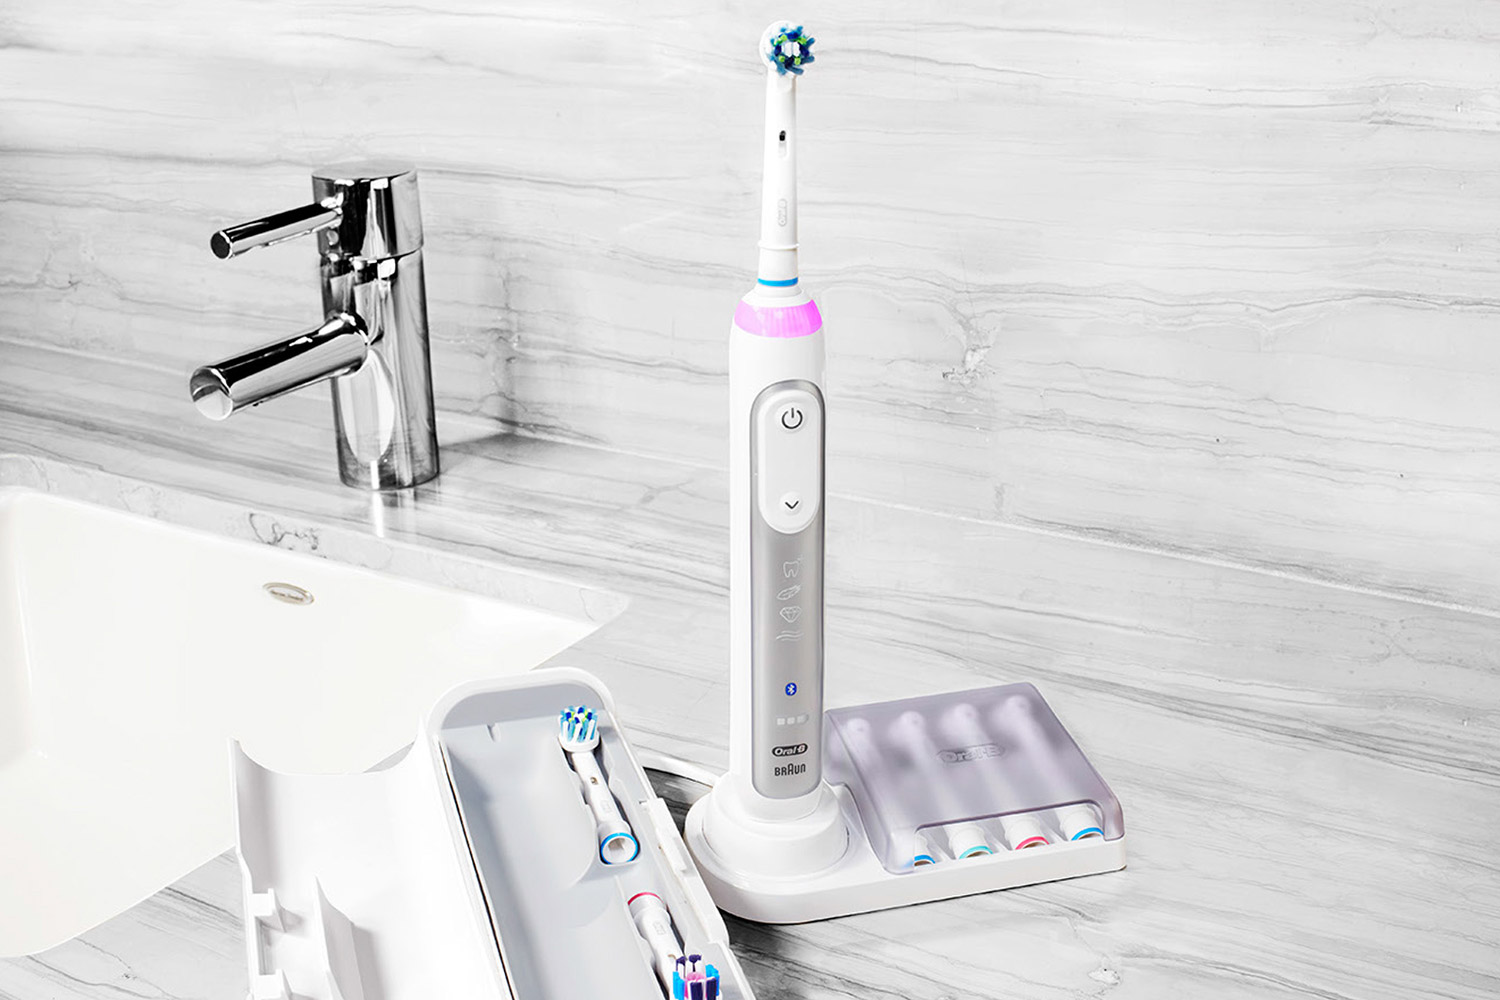 oral b genius toothbrush location tracking technology lifestyle 3